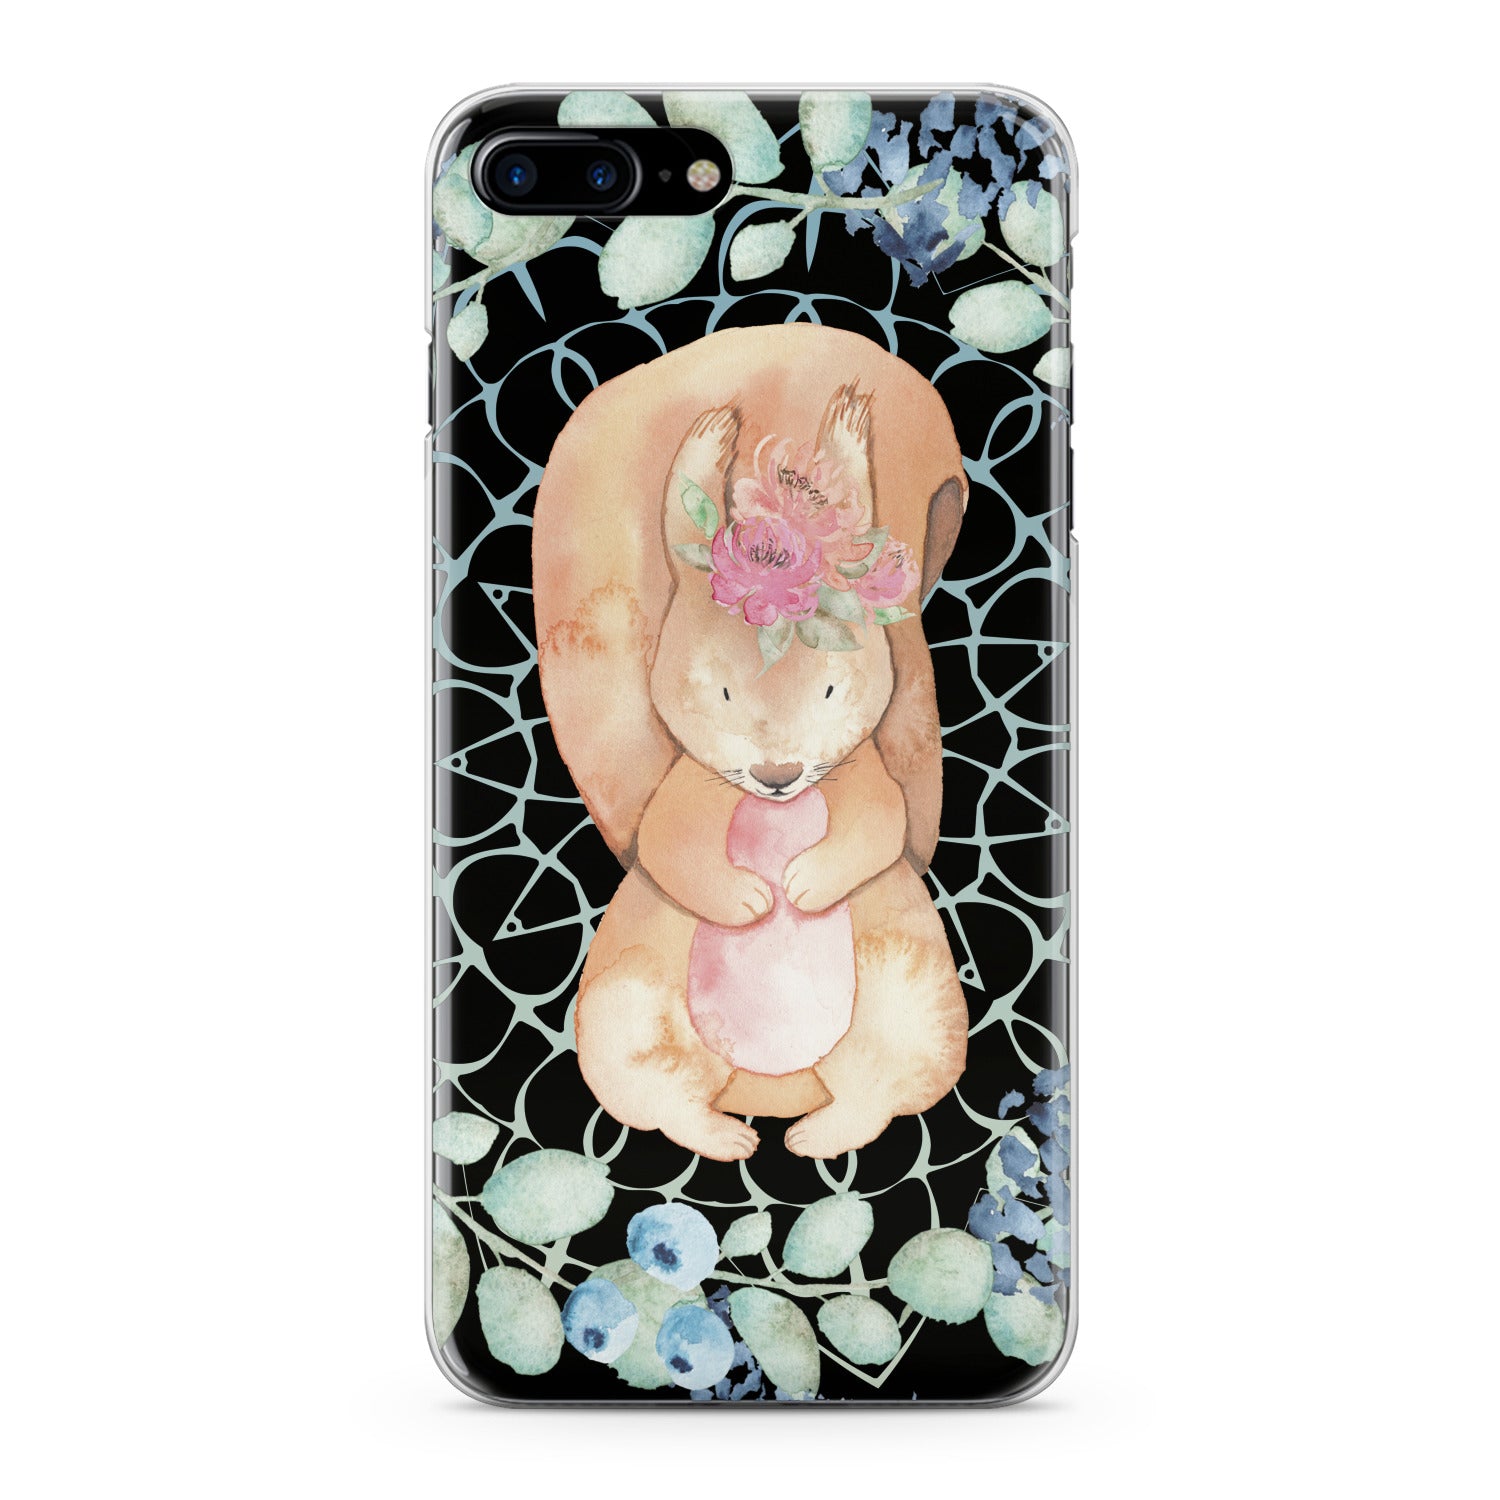 Lex Altern Adorable Squirrel Phone Case for your iPhone & Android phone.